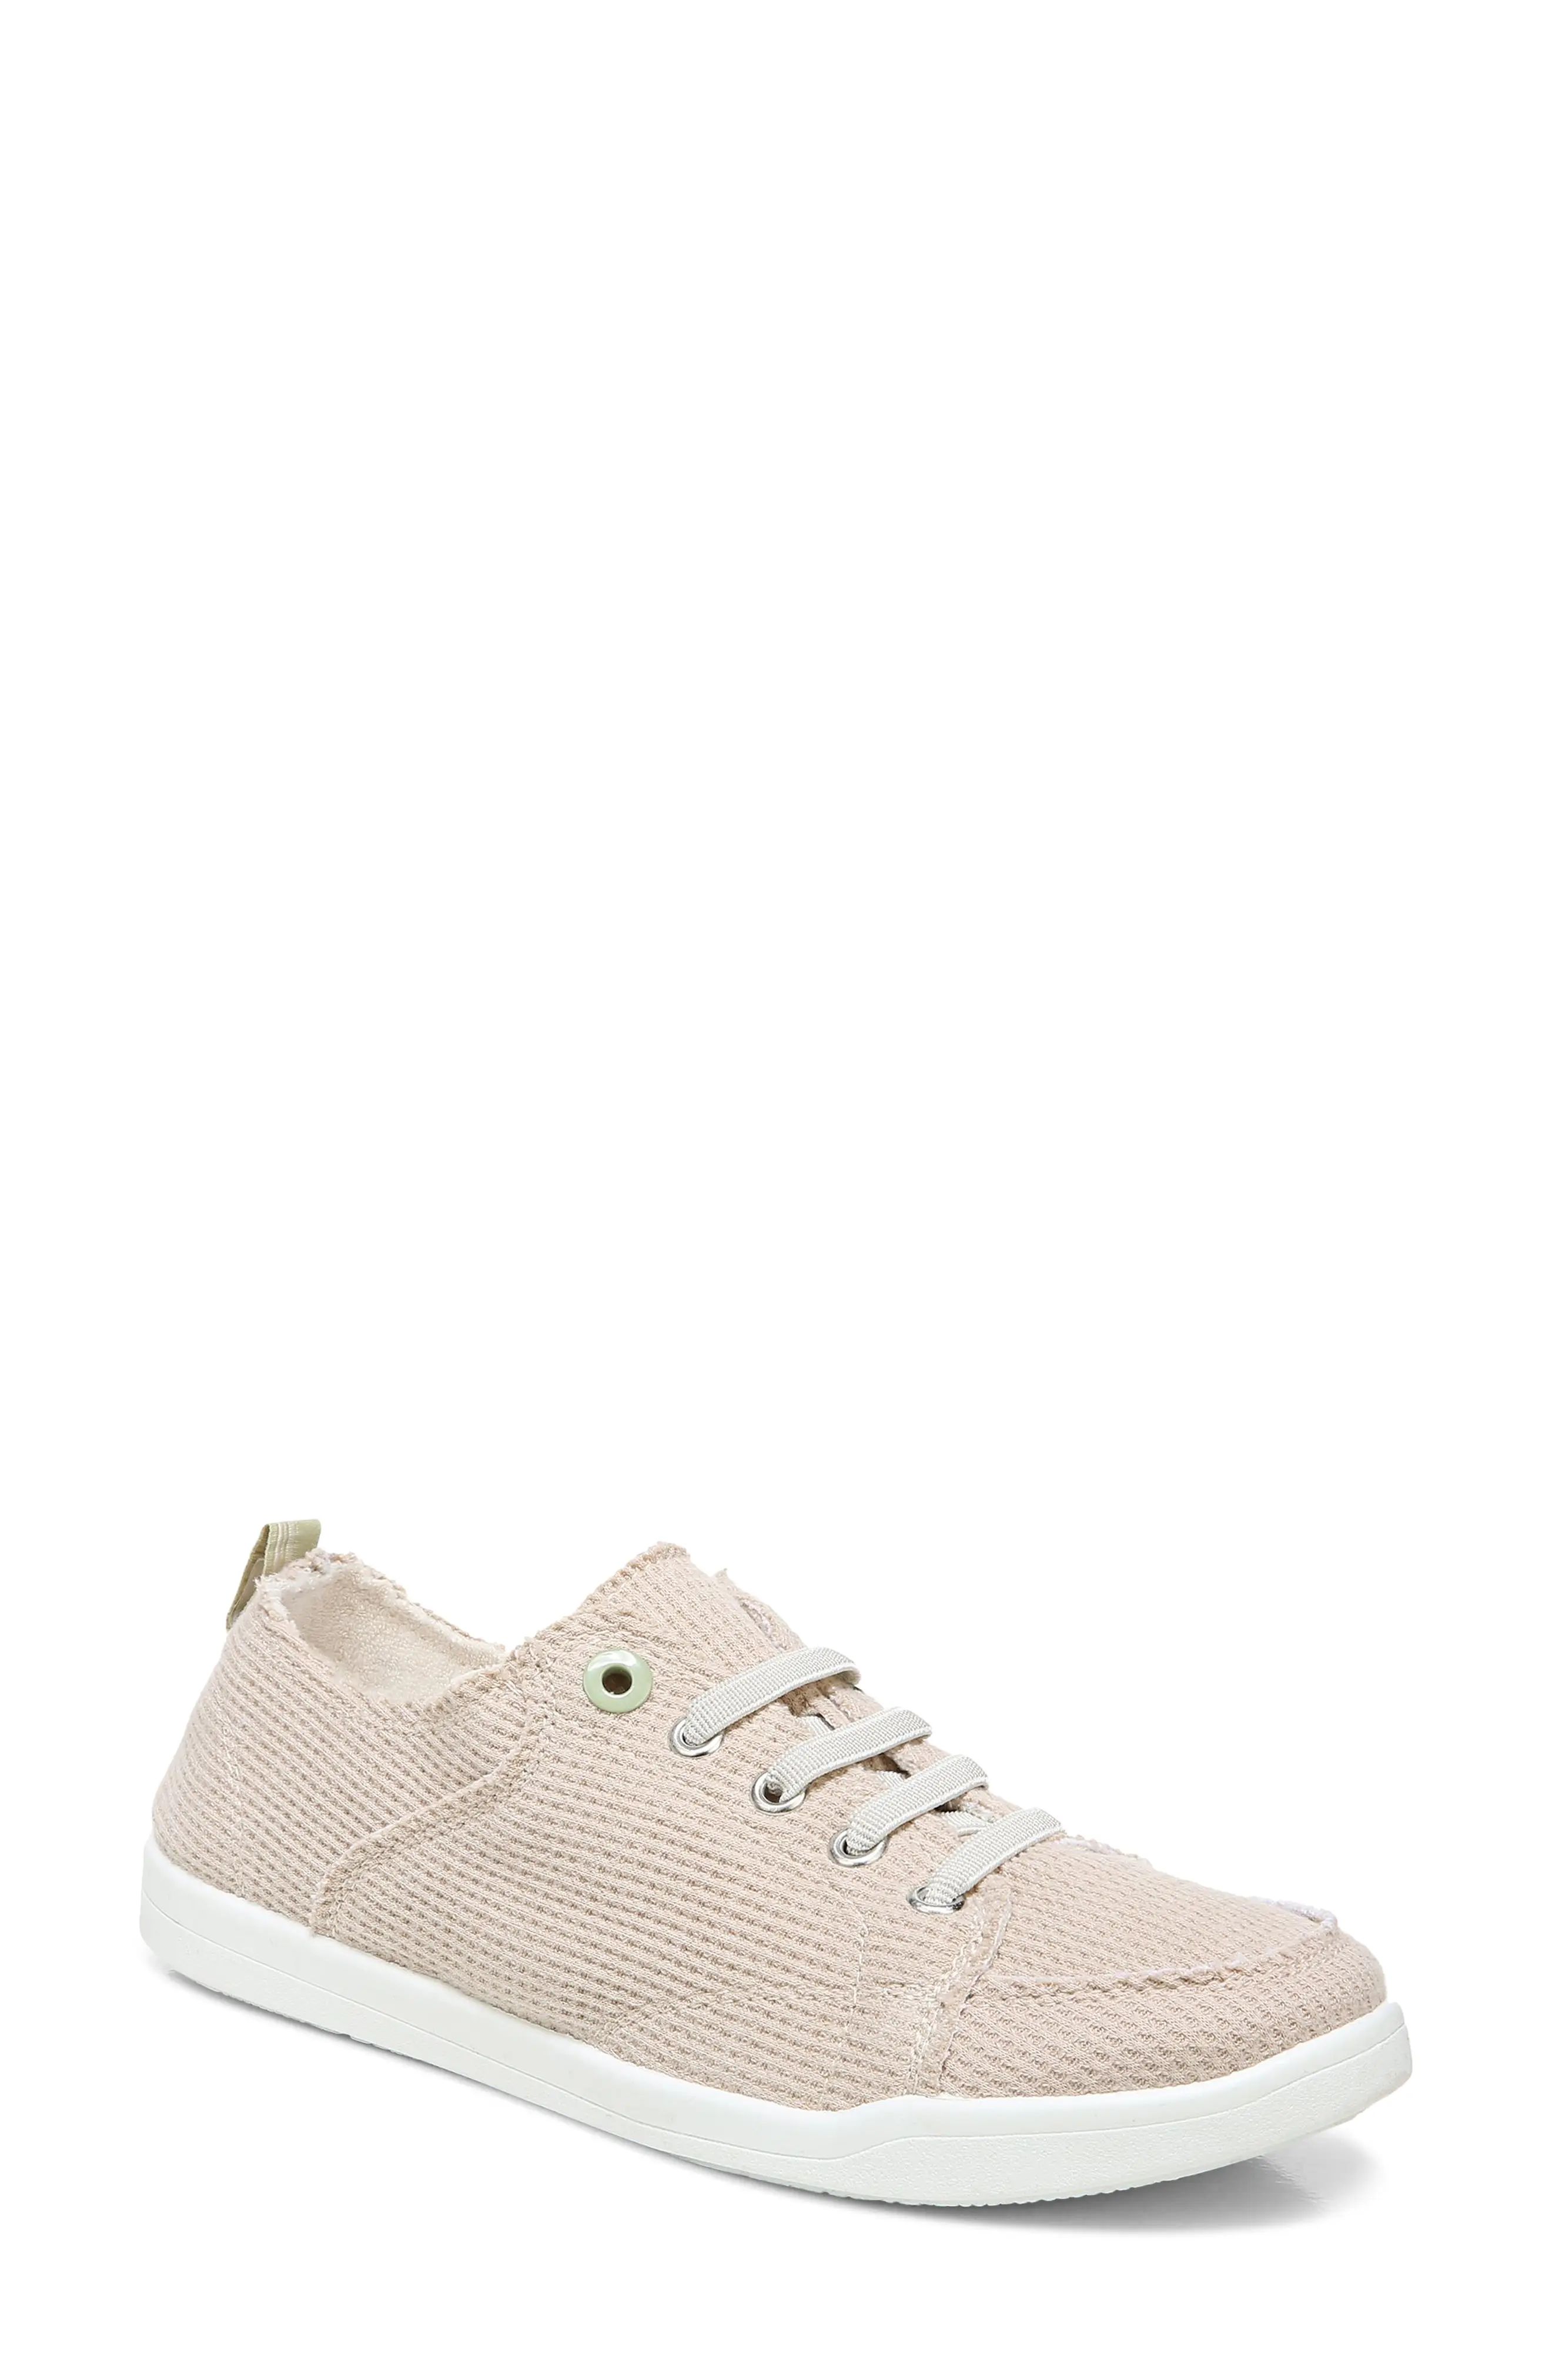 Vionic Beach Collection Pismo Lace-Up Sneaker in Cream - 250 at Nordstrom, Size 11 | Nordstrom